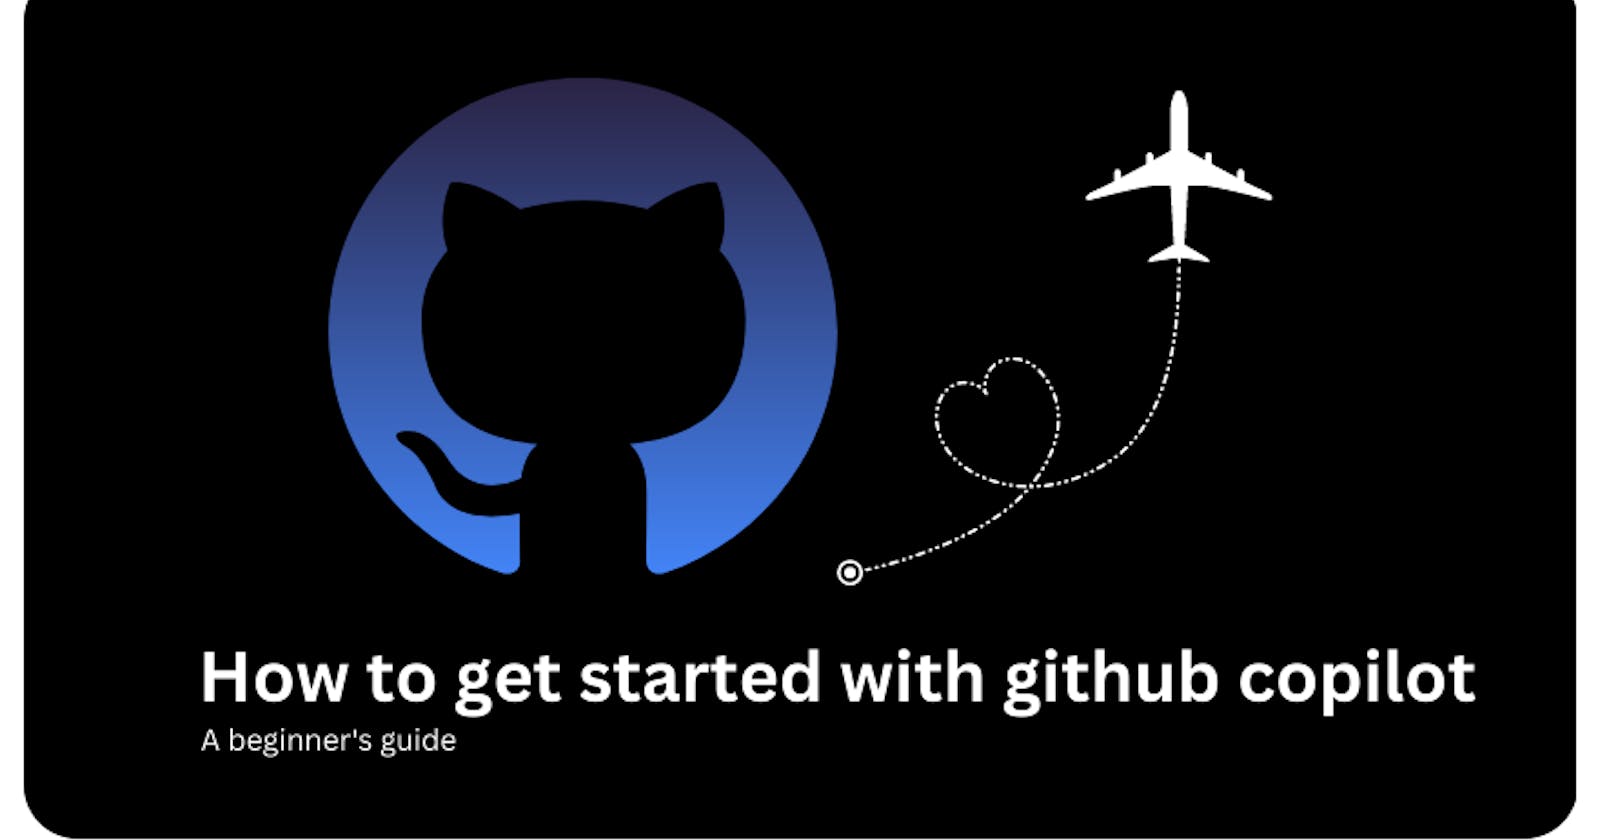 How to get started with github copilot